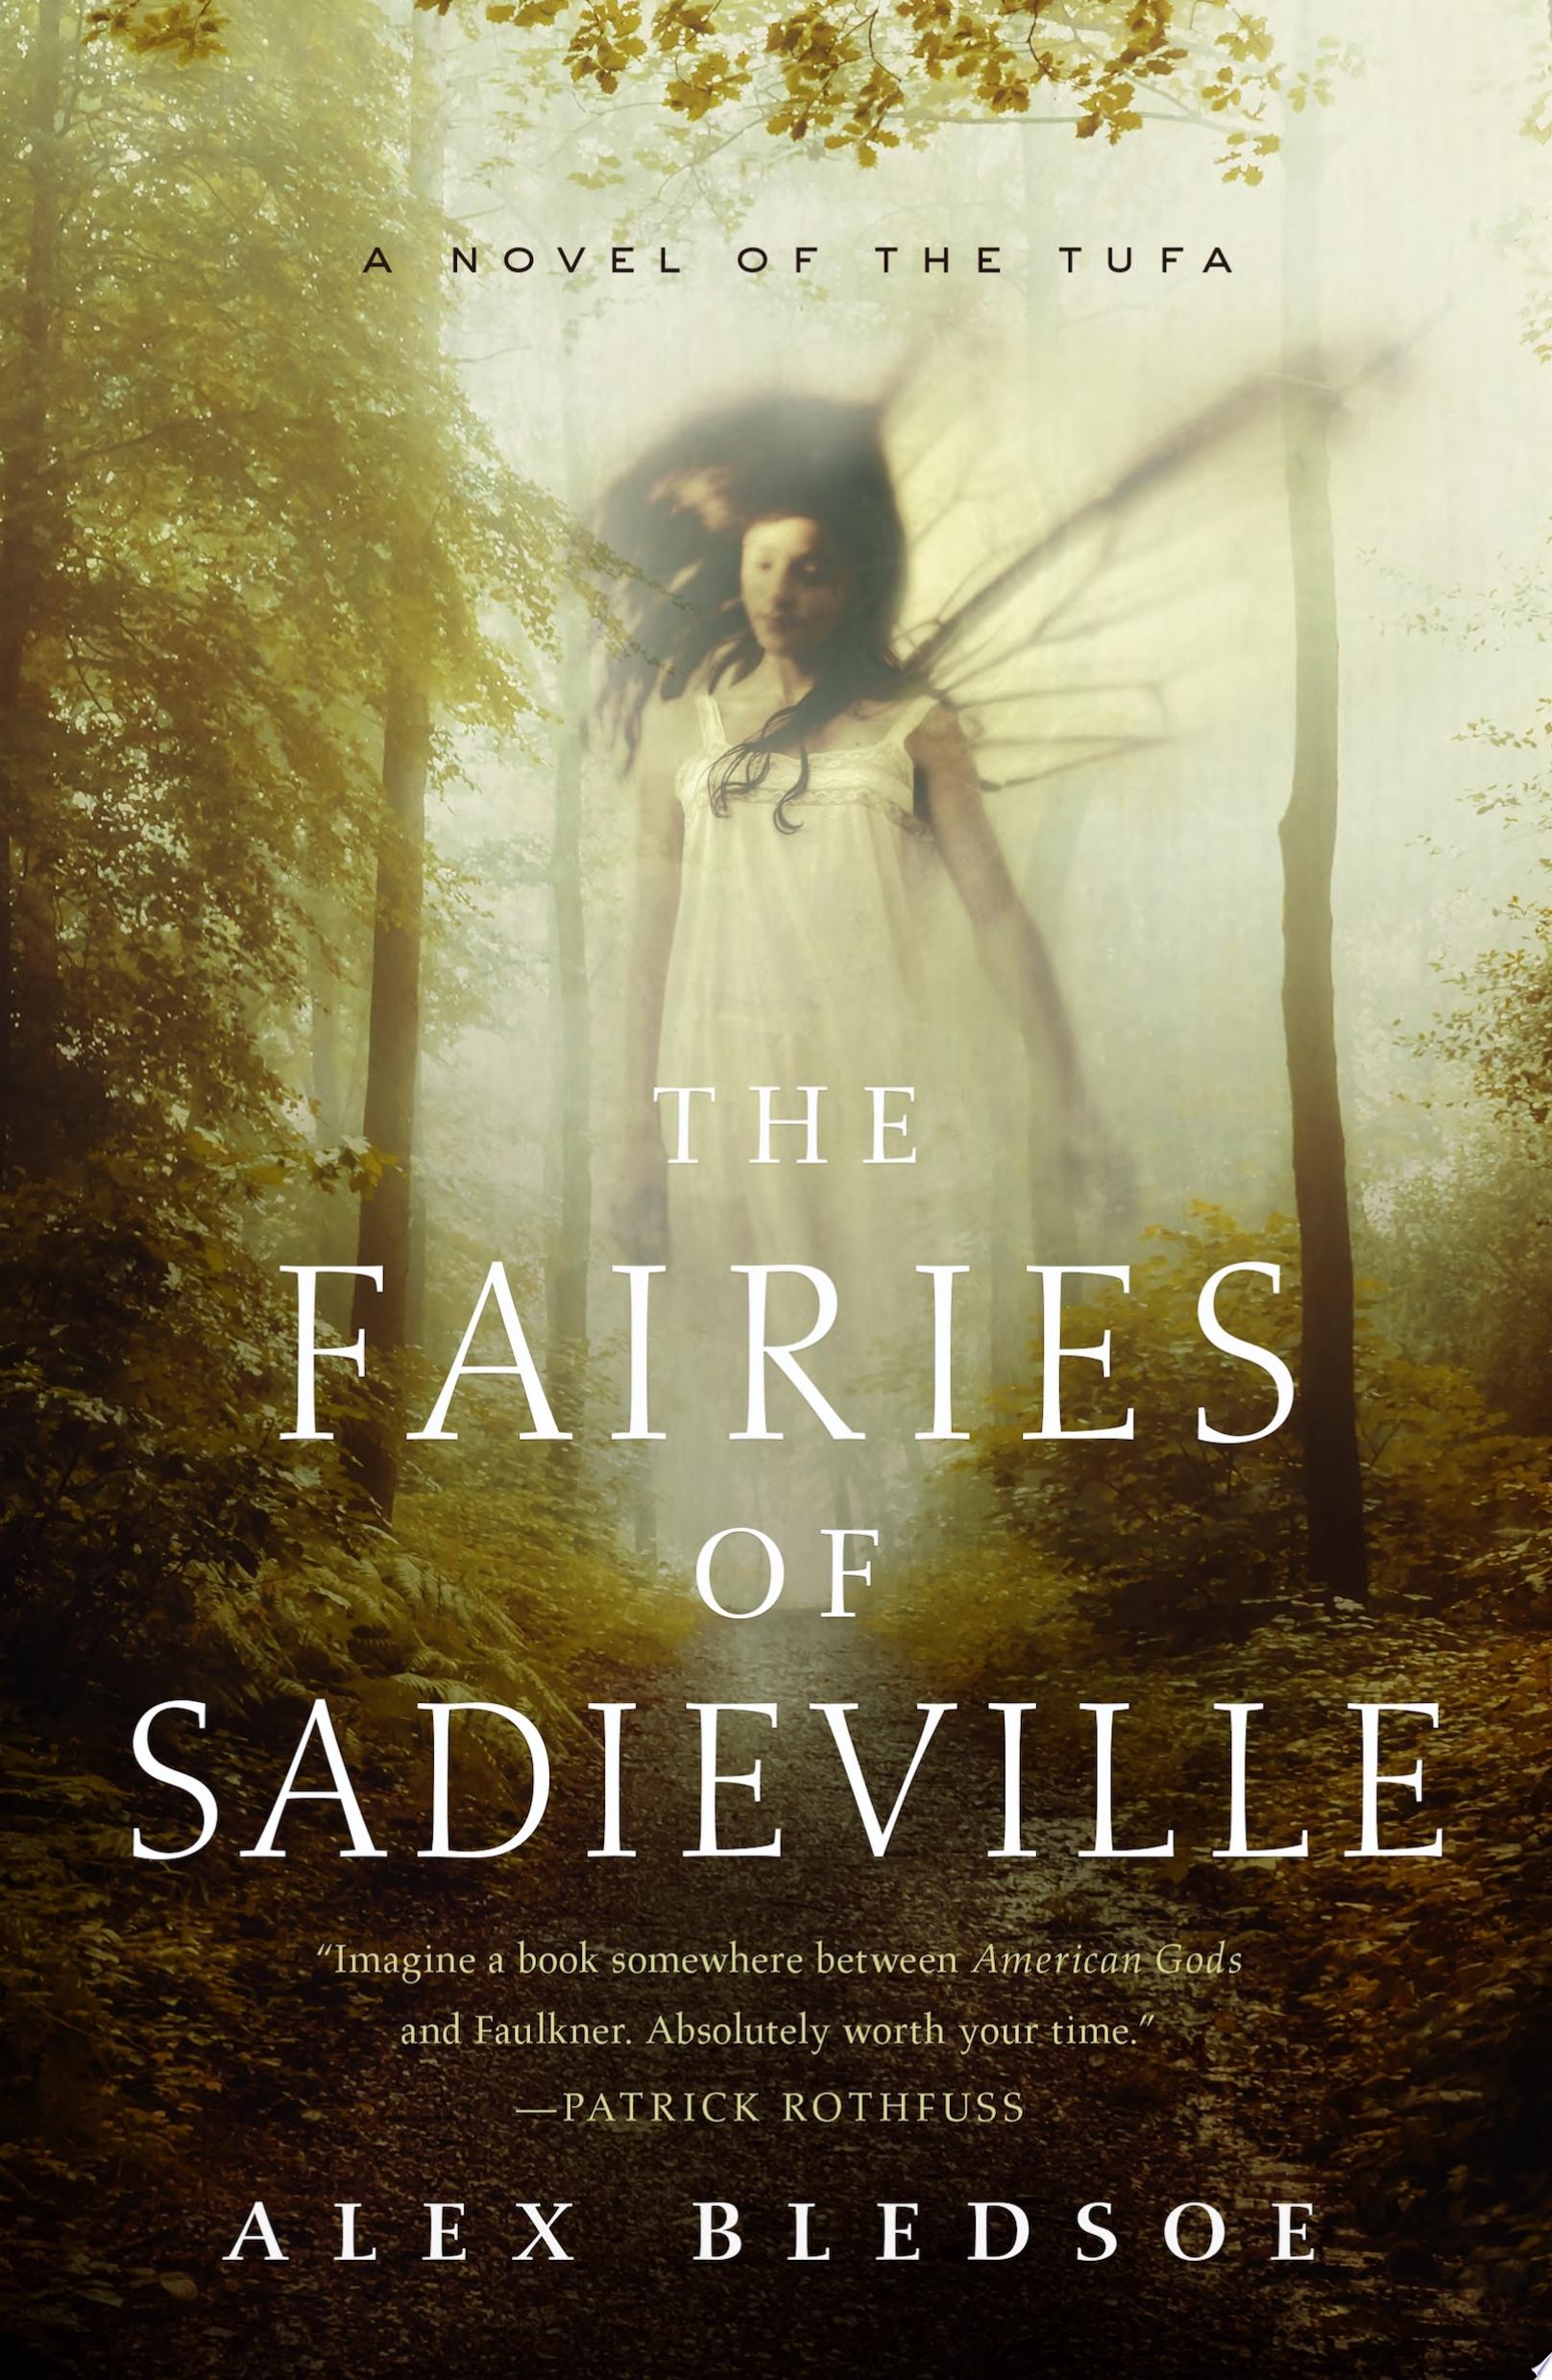 Image for "The Fairies of Sadieville"